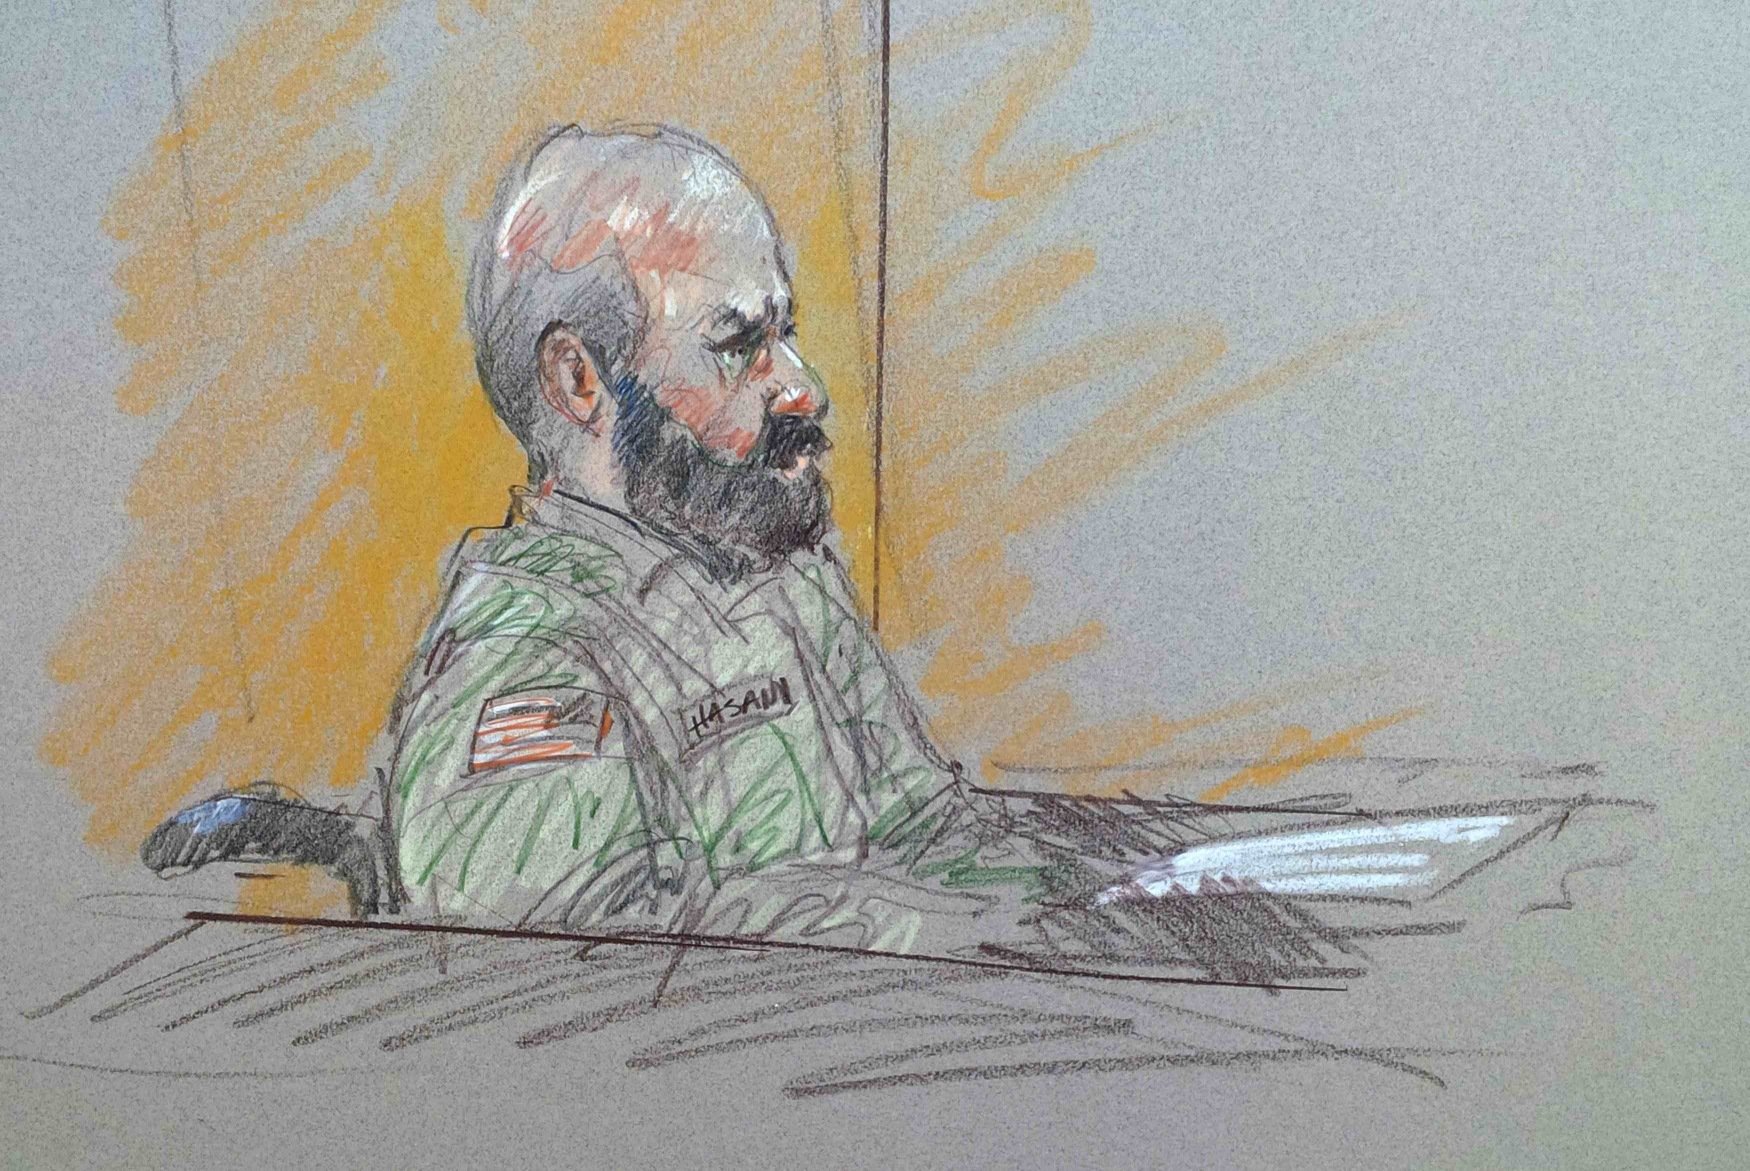 A sketch of Major Nidal Malik Hasan during his trial at the US Army post in Fort Hood in Texas. Photo: Reuters